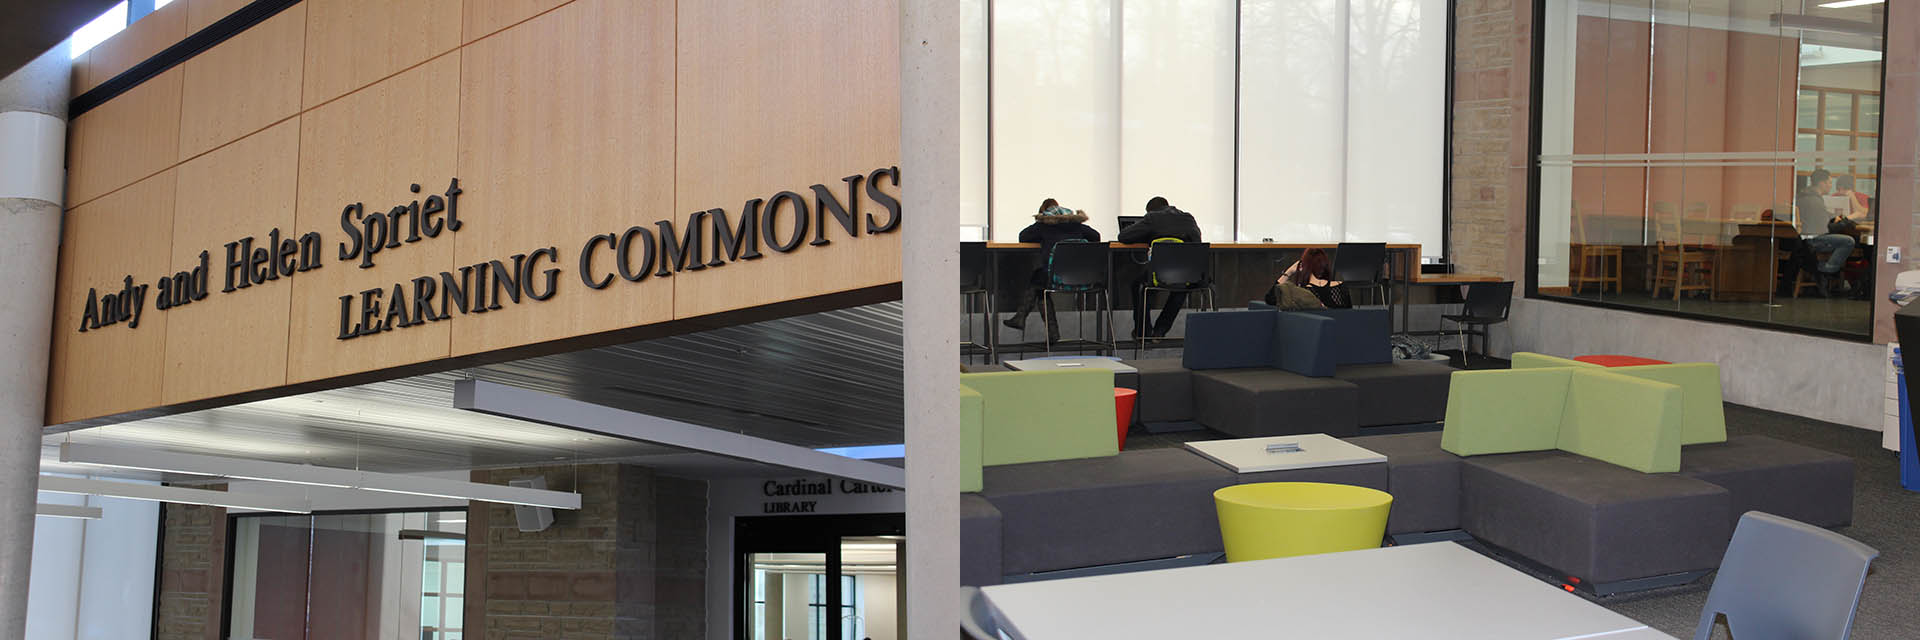 Image: Learning Commons